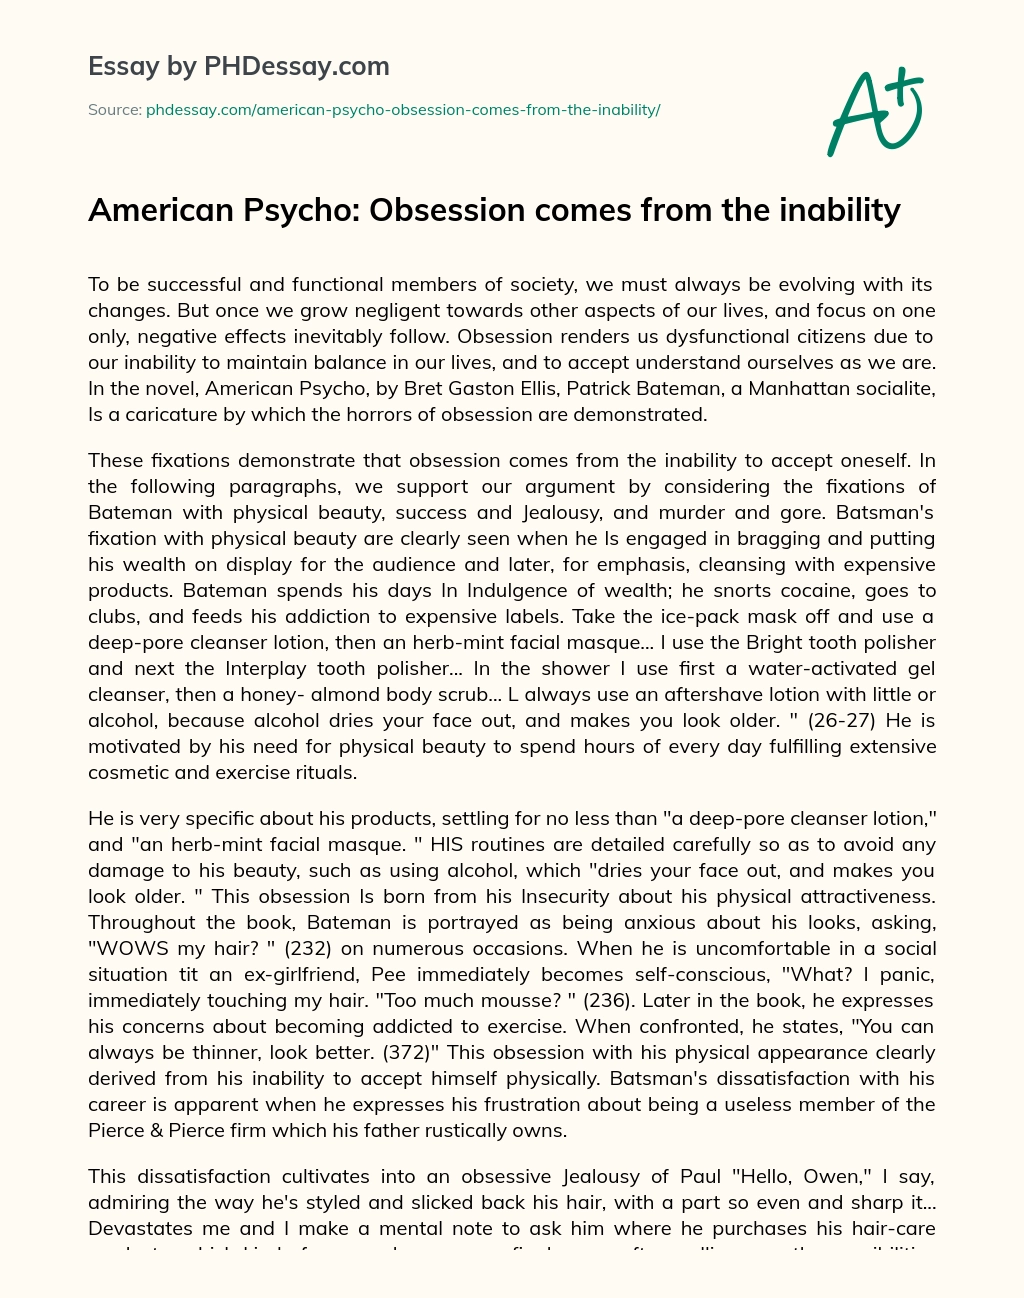 American Psycho: Obsession comes from the inability essay